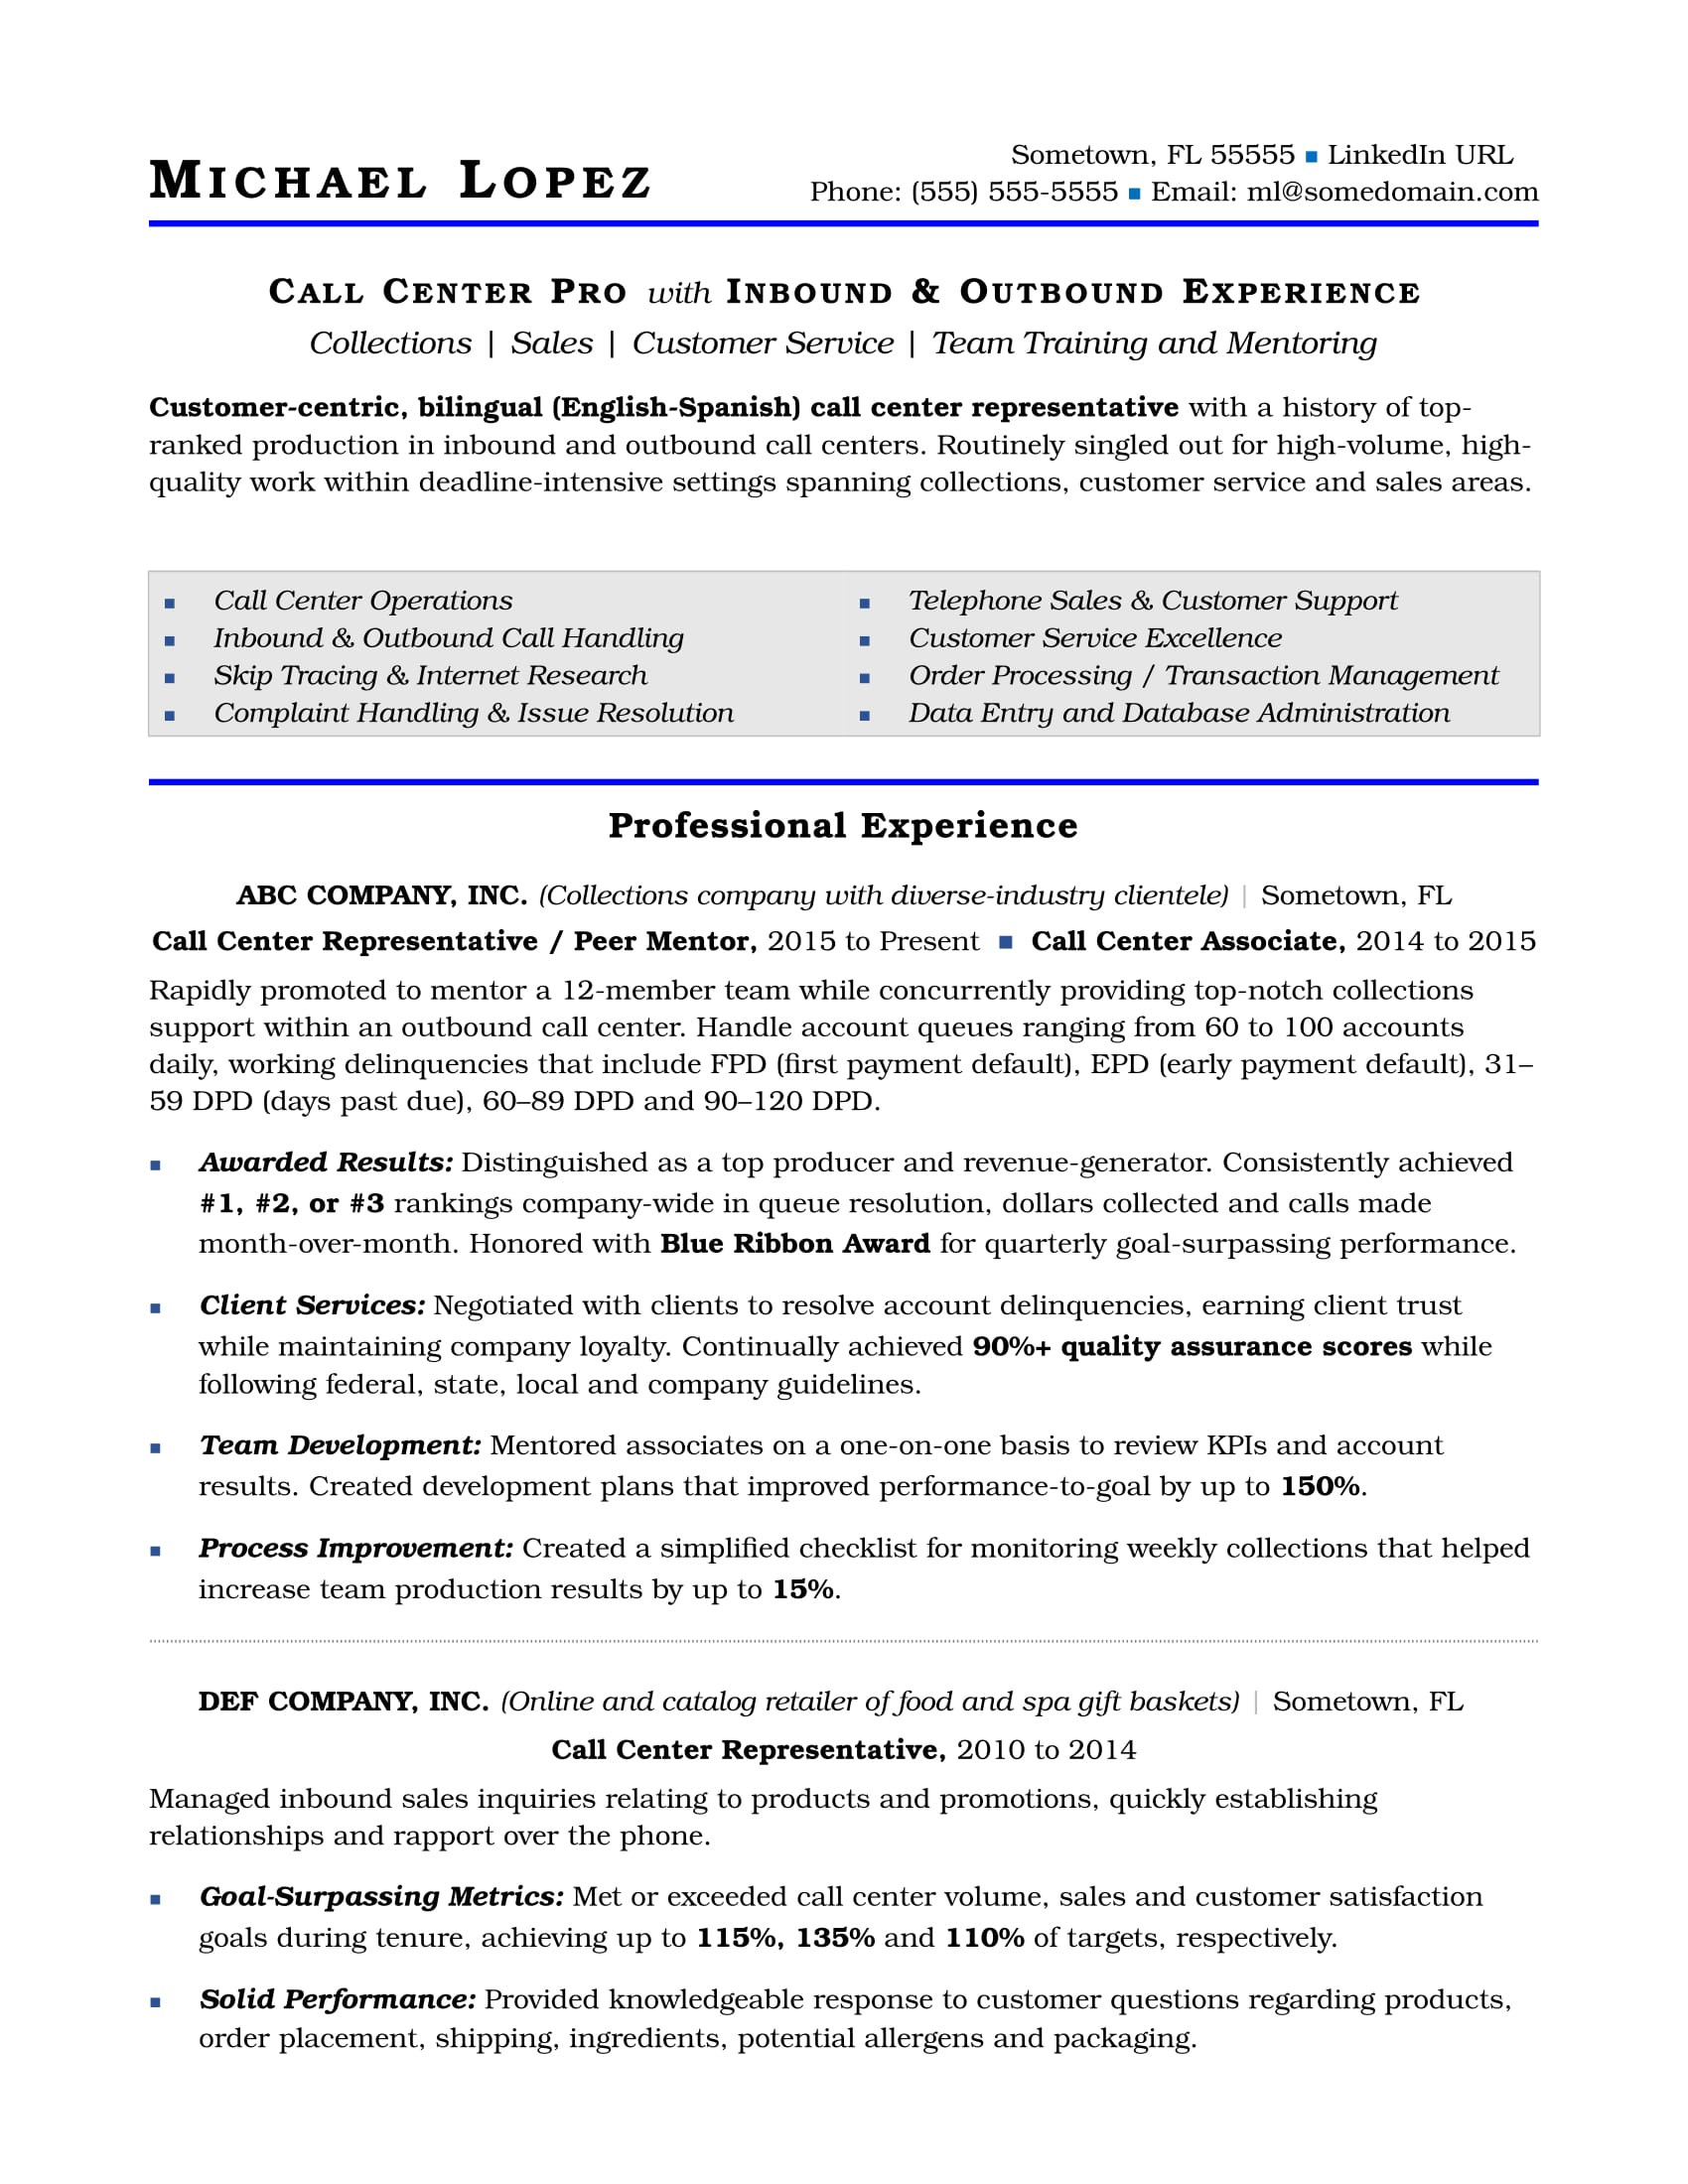 Call Center Resume Examples and Samples Call Center Resume Sample